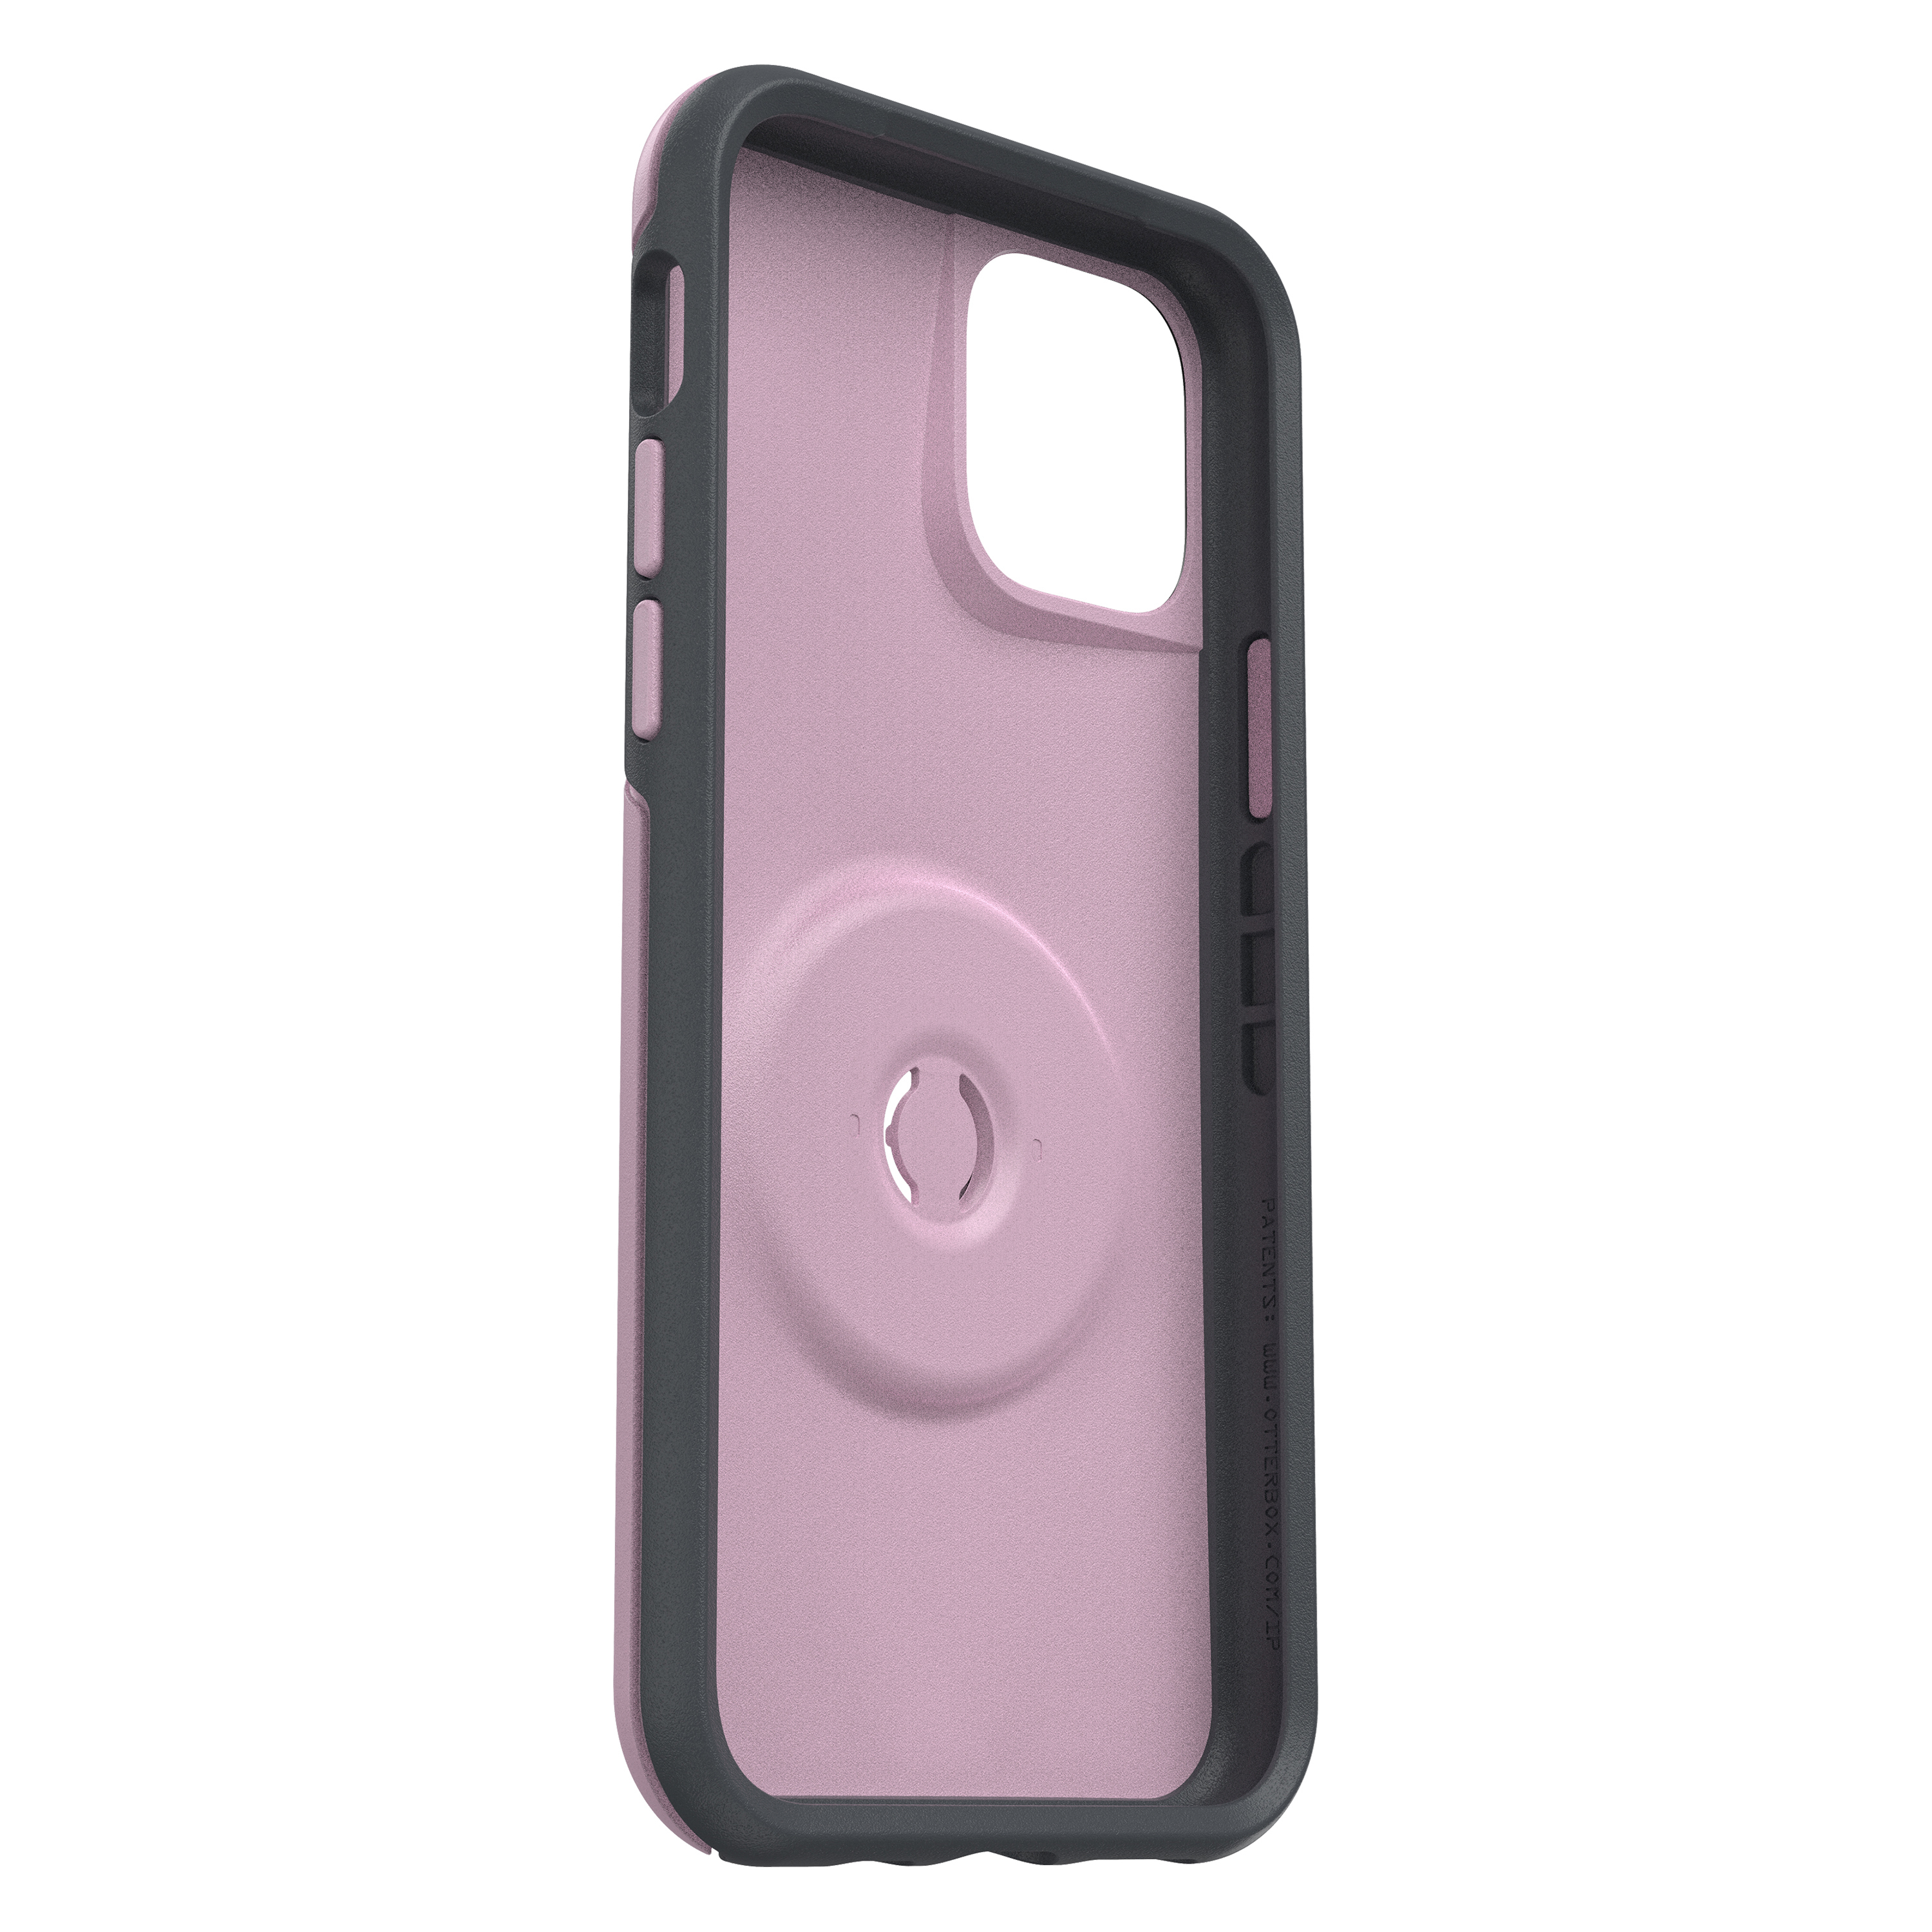 Pro, Symmetry, iPhone Apple, 11 Rosa OTTERBOX Backcover,